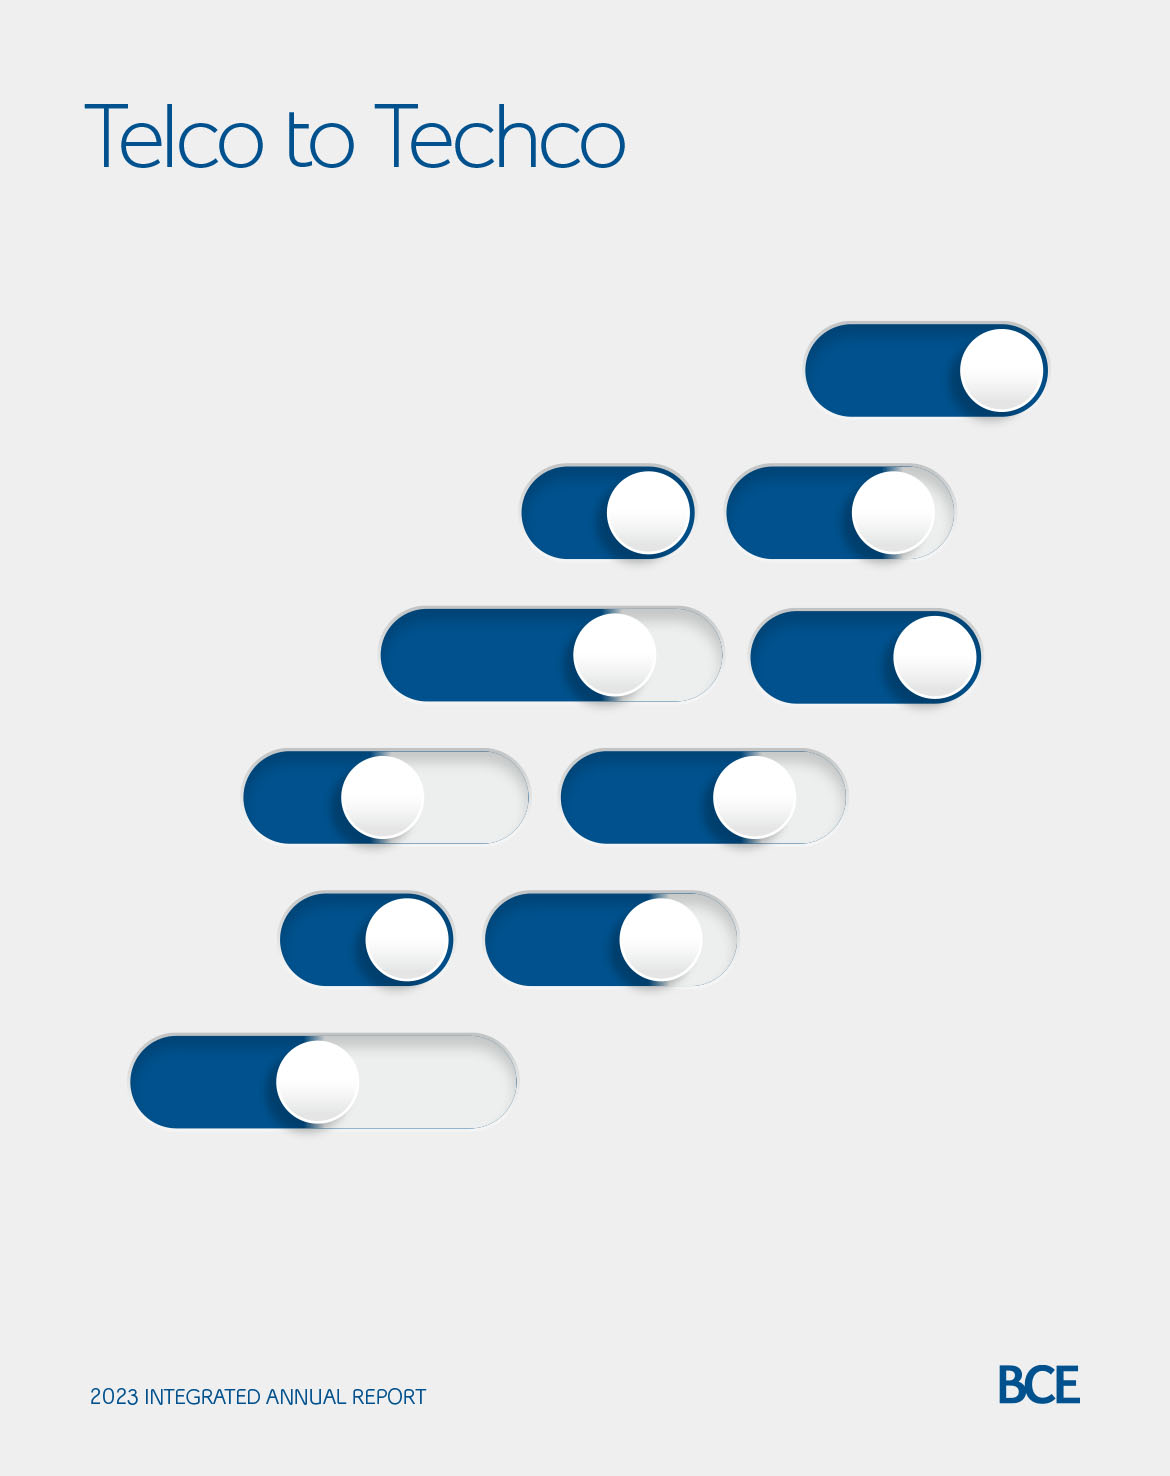 "Telco to Techno" with toggles